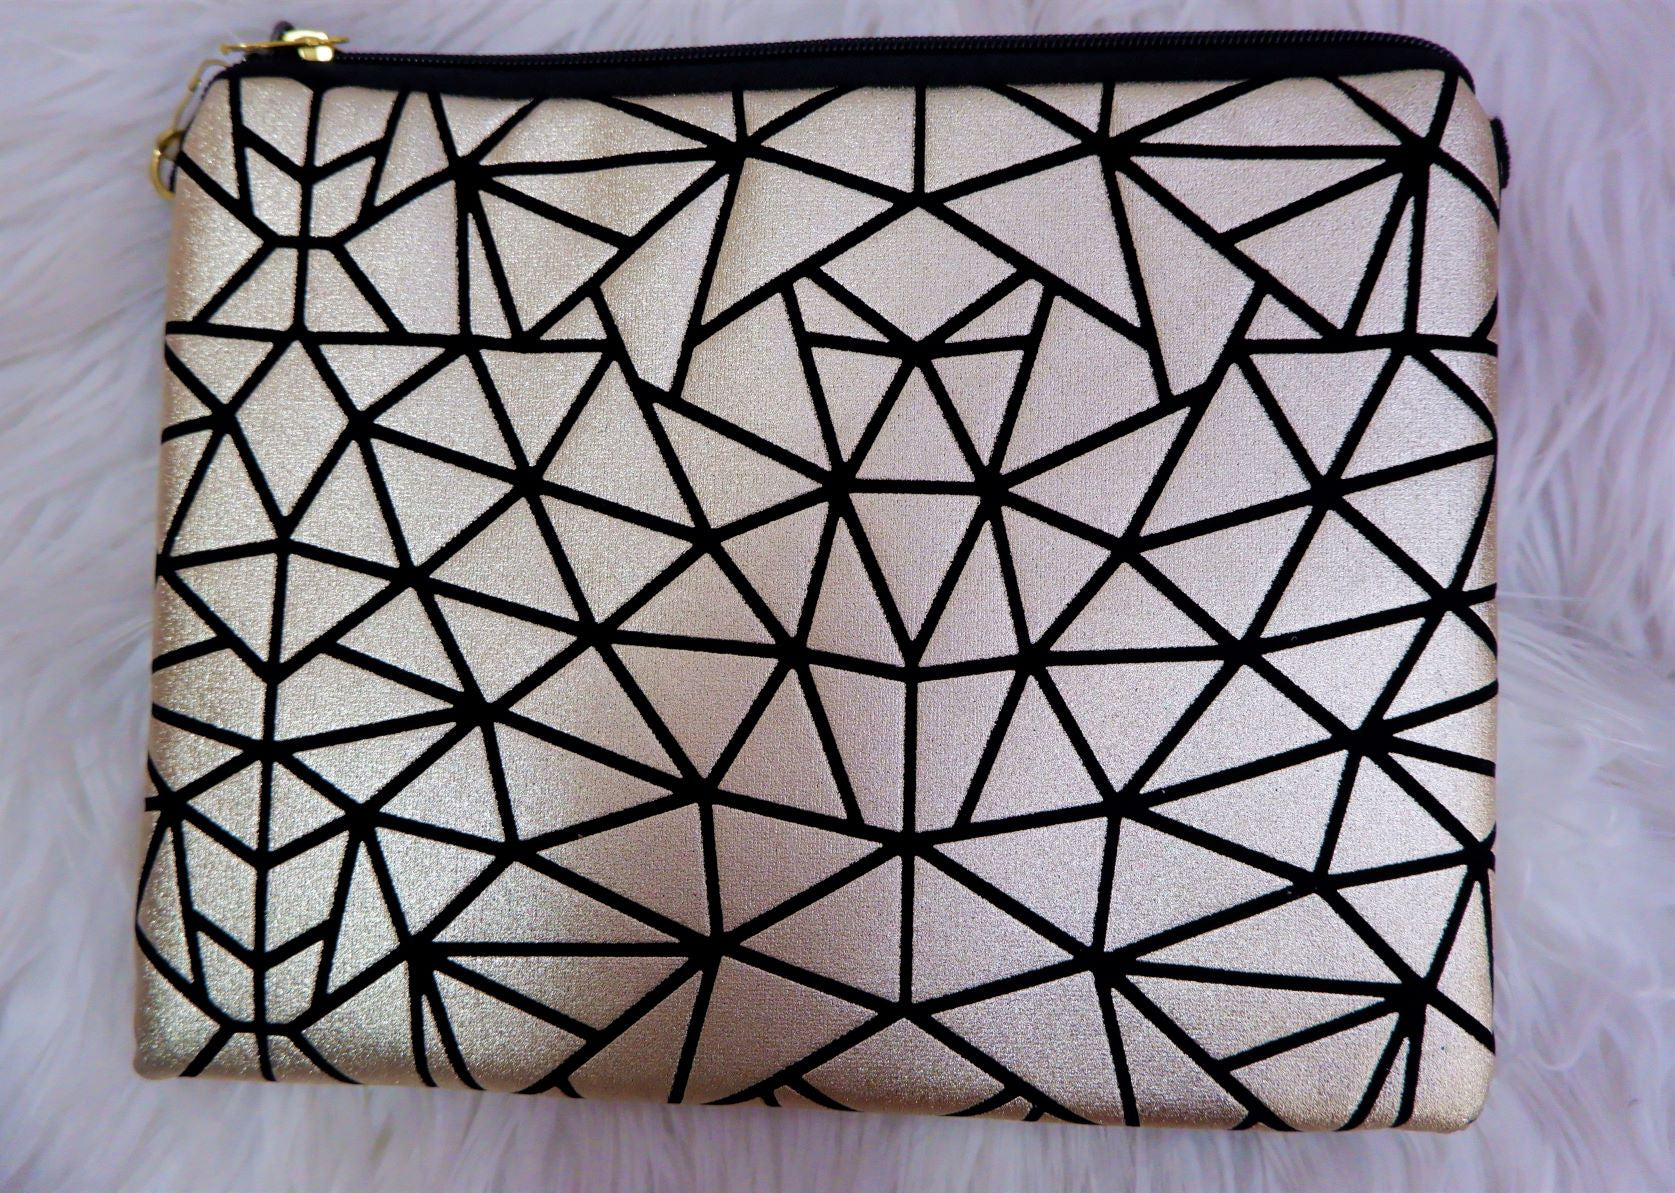 Rolf Clutch and Sling Bag